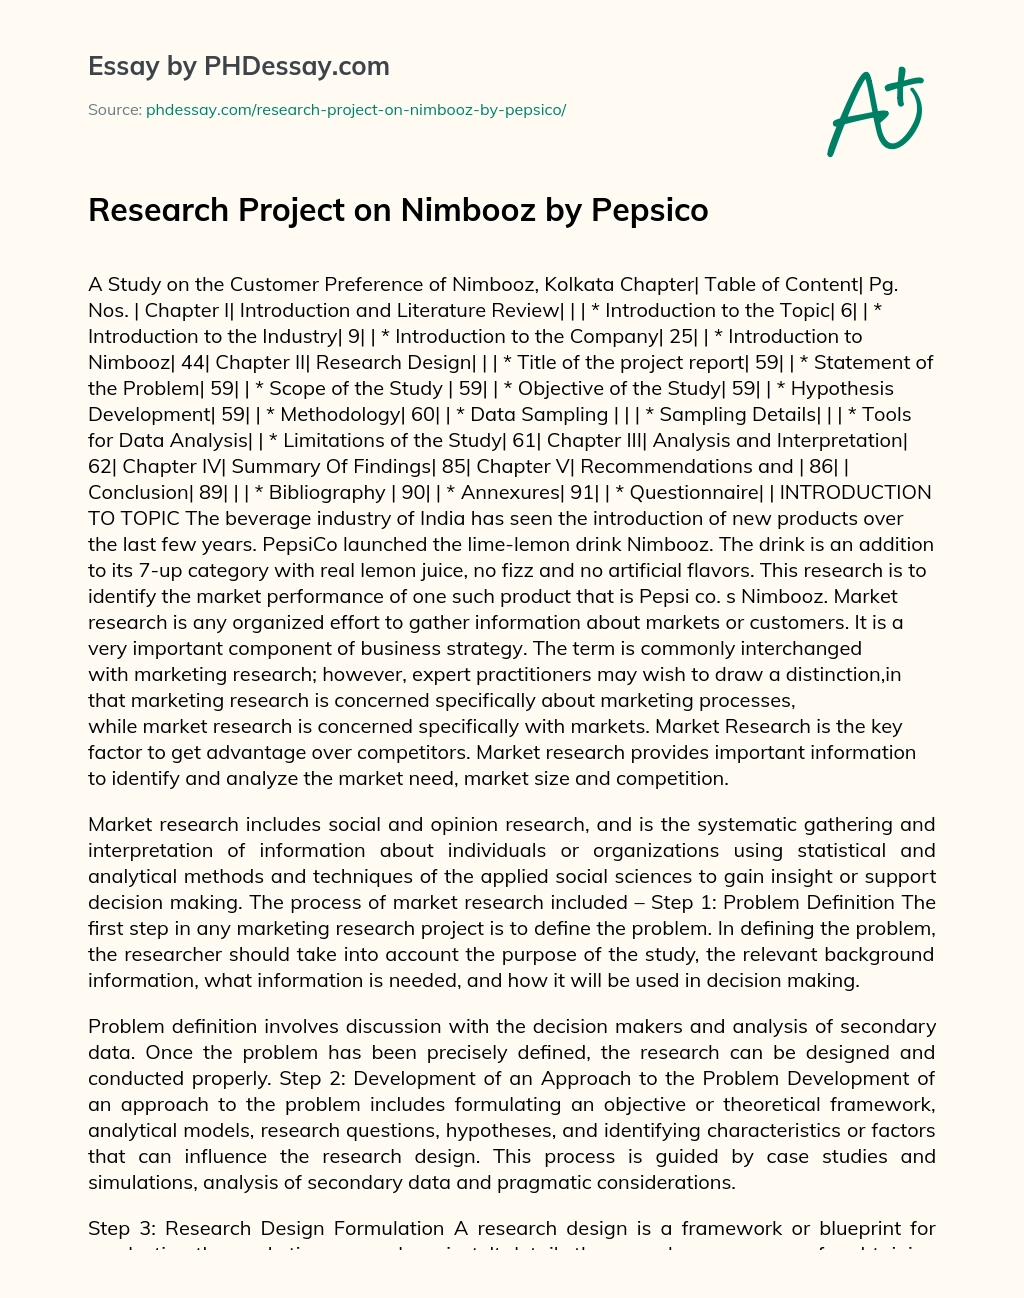 Research Project on Nimbooz by Pepsico essay